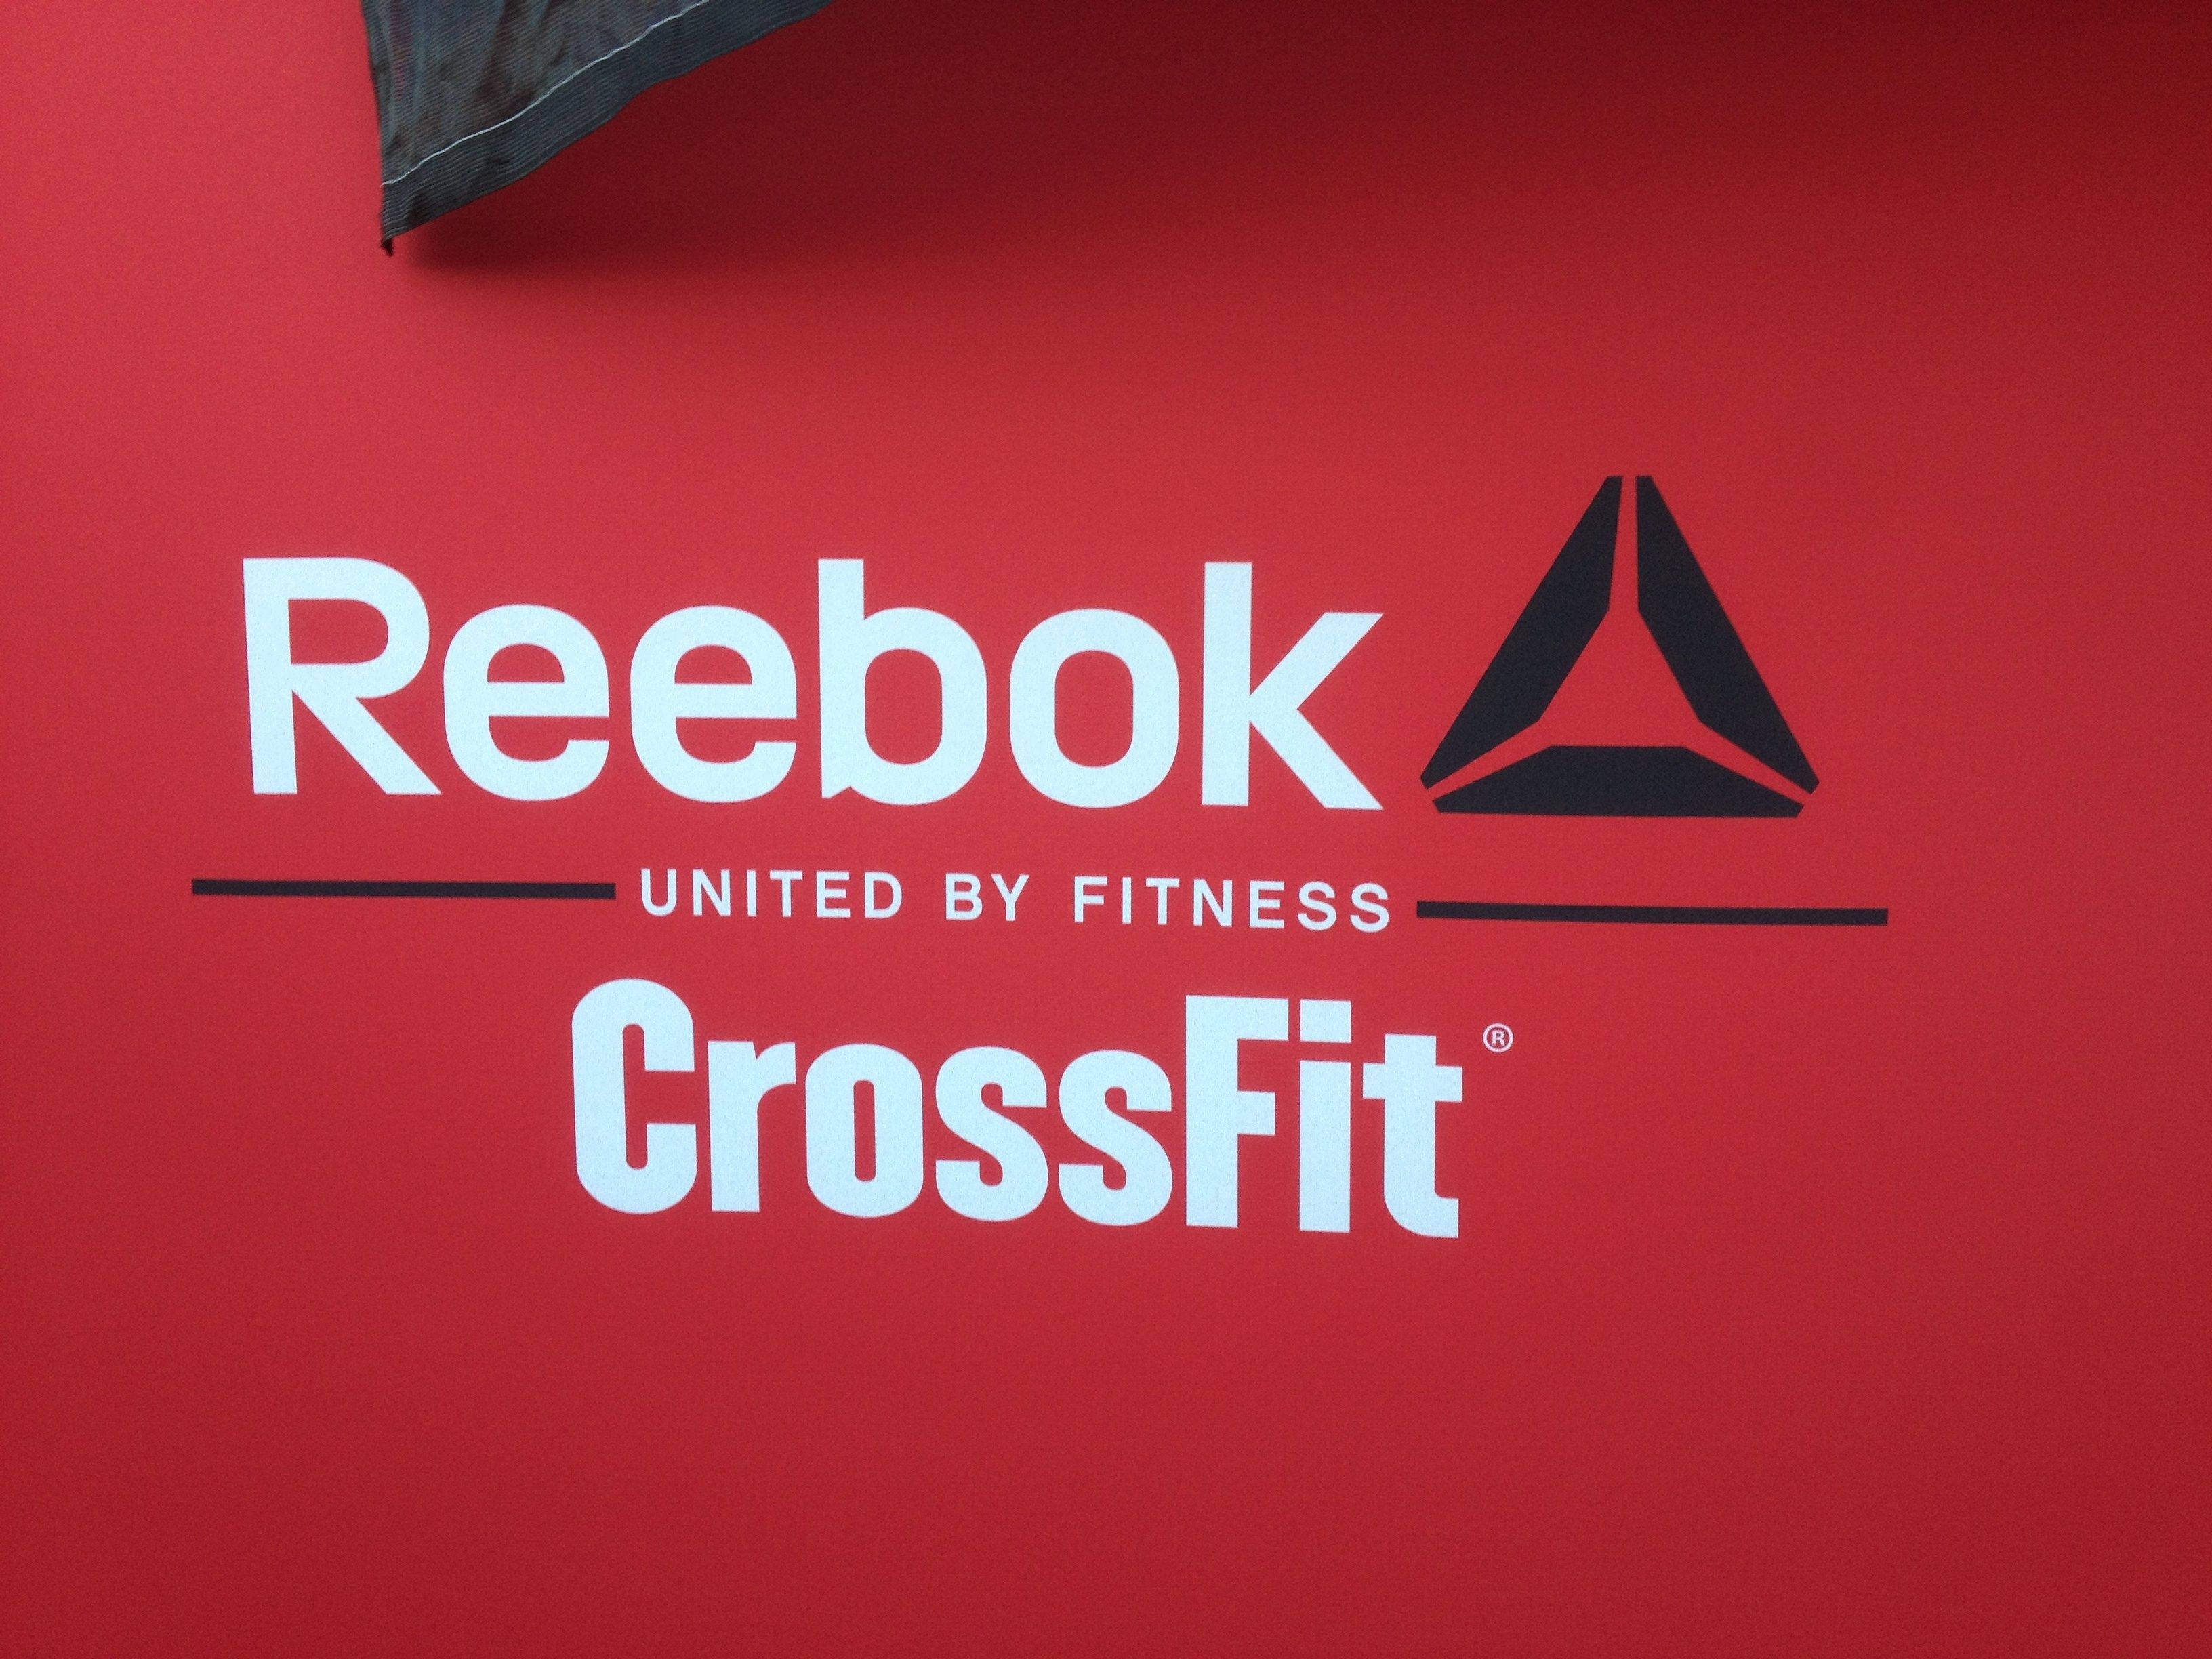 Download Reebok Crossfit United By Fitness Wallpaper Wallpapers Com